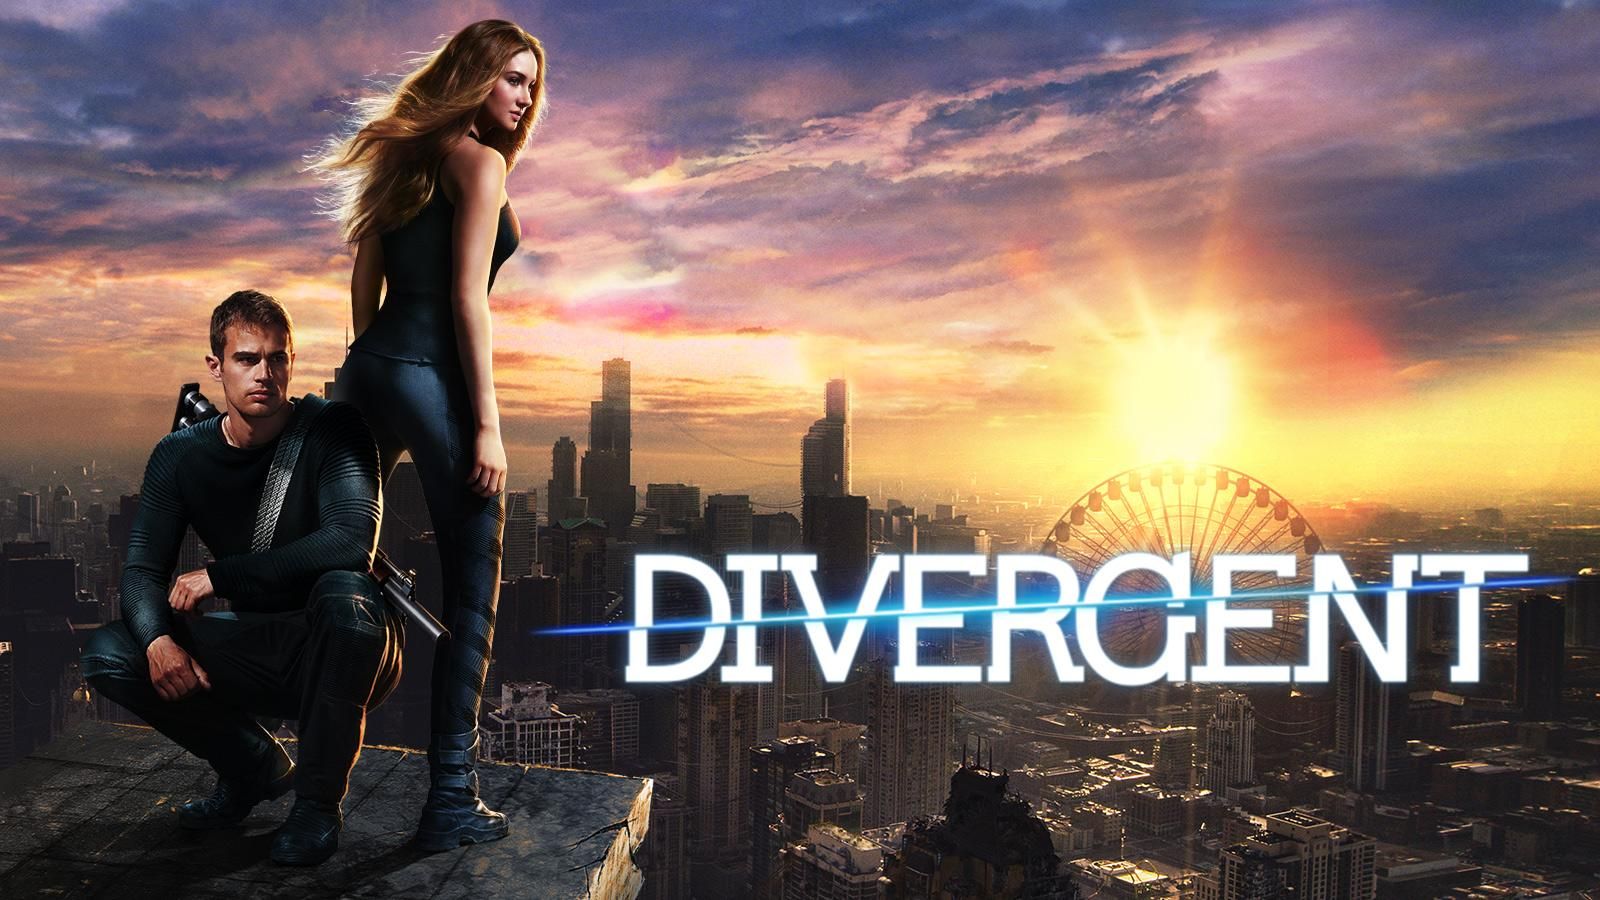 A Cover Picture Of Divergent